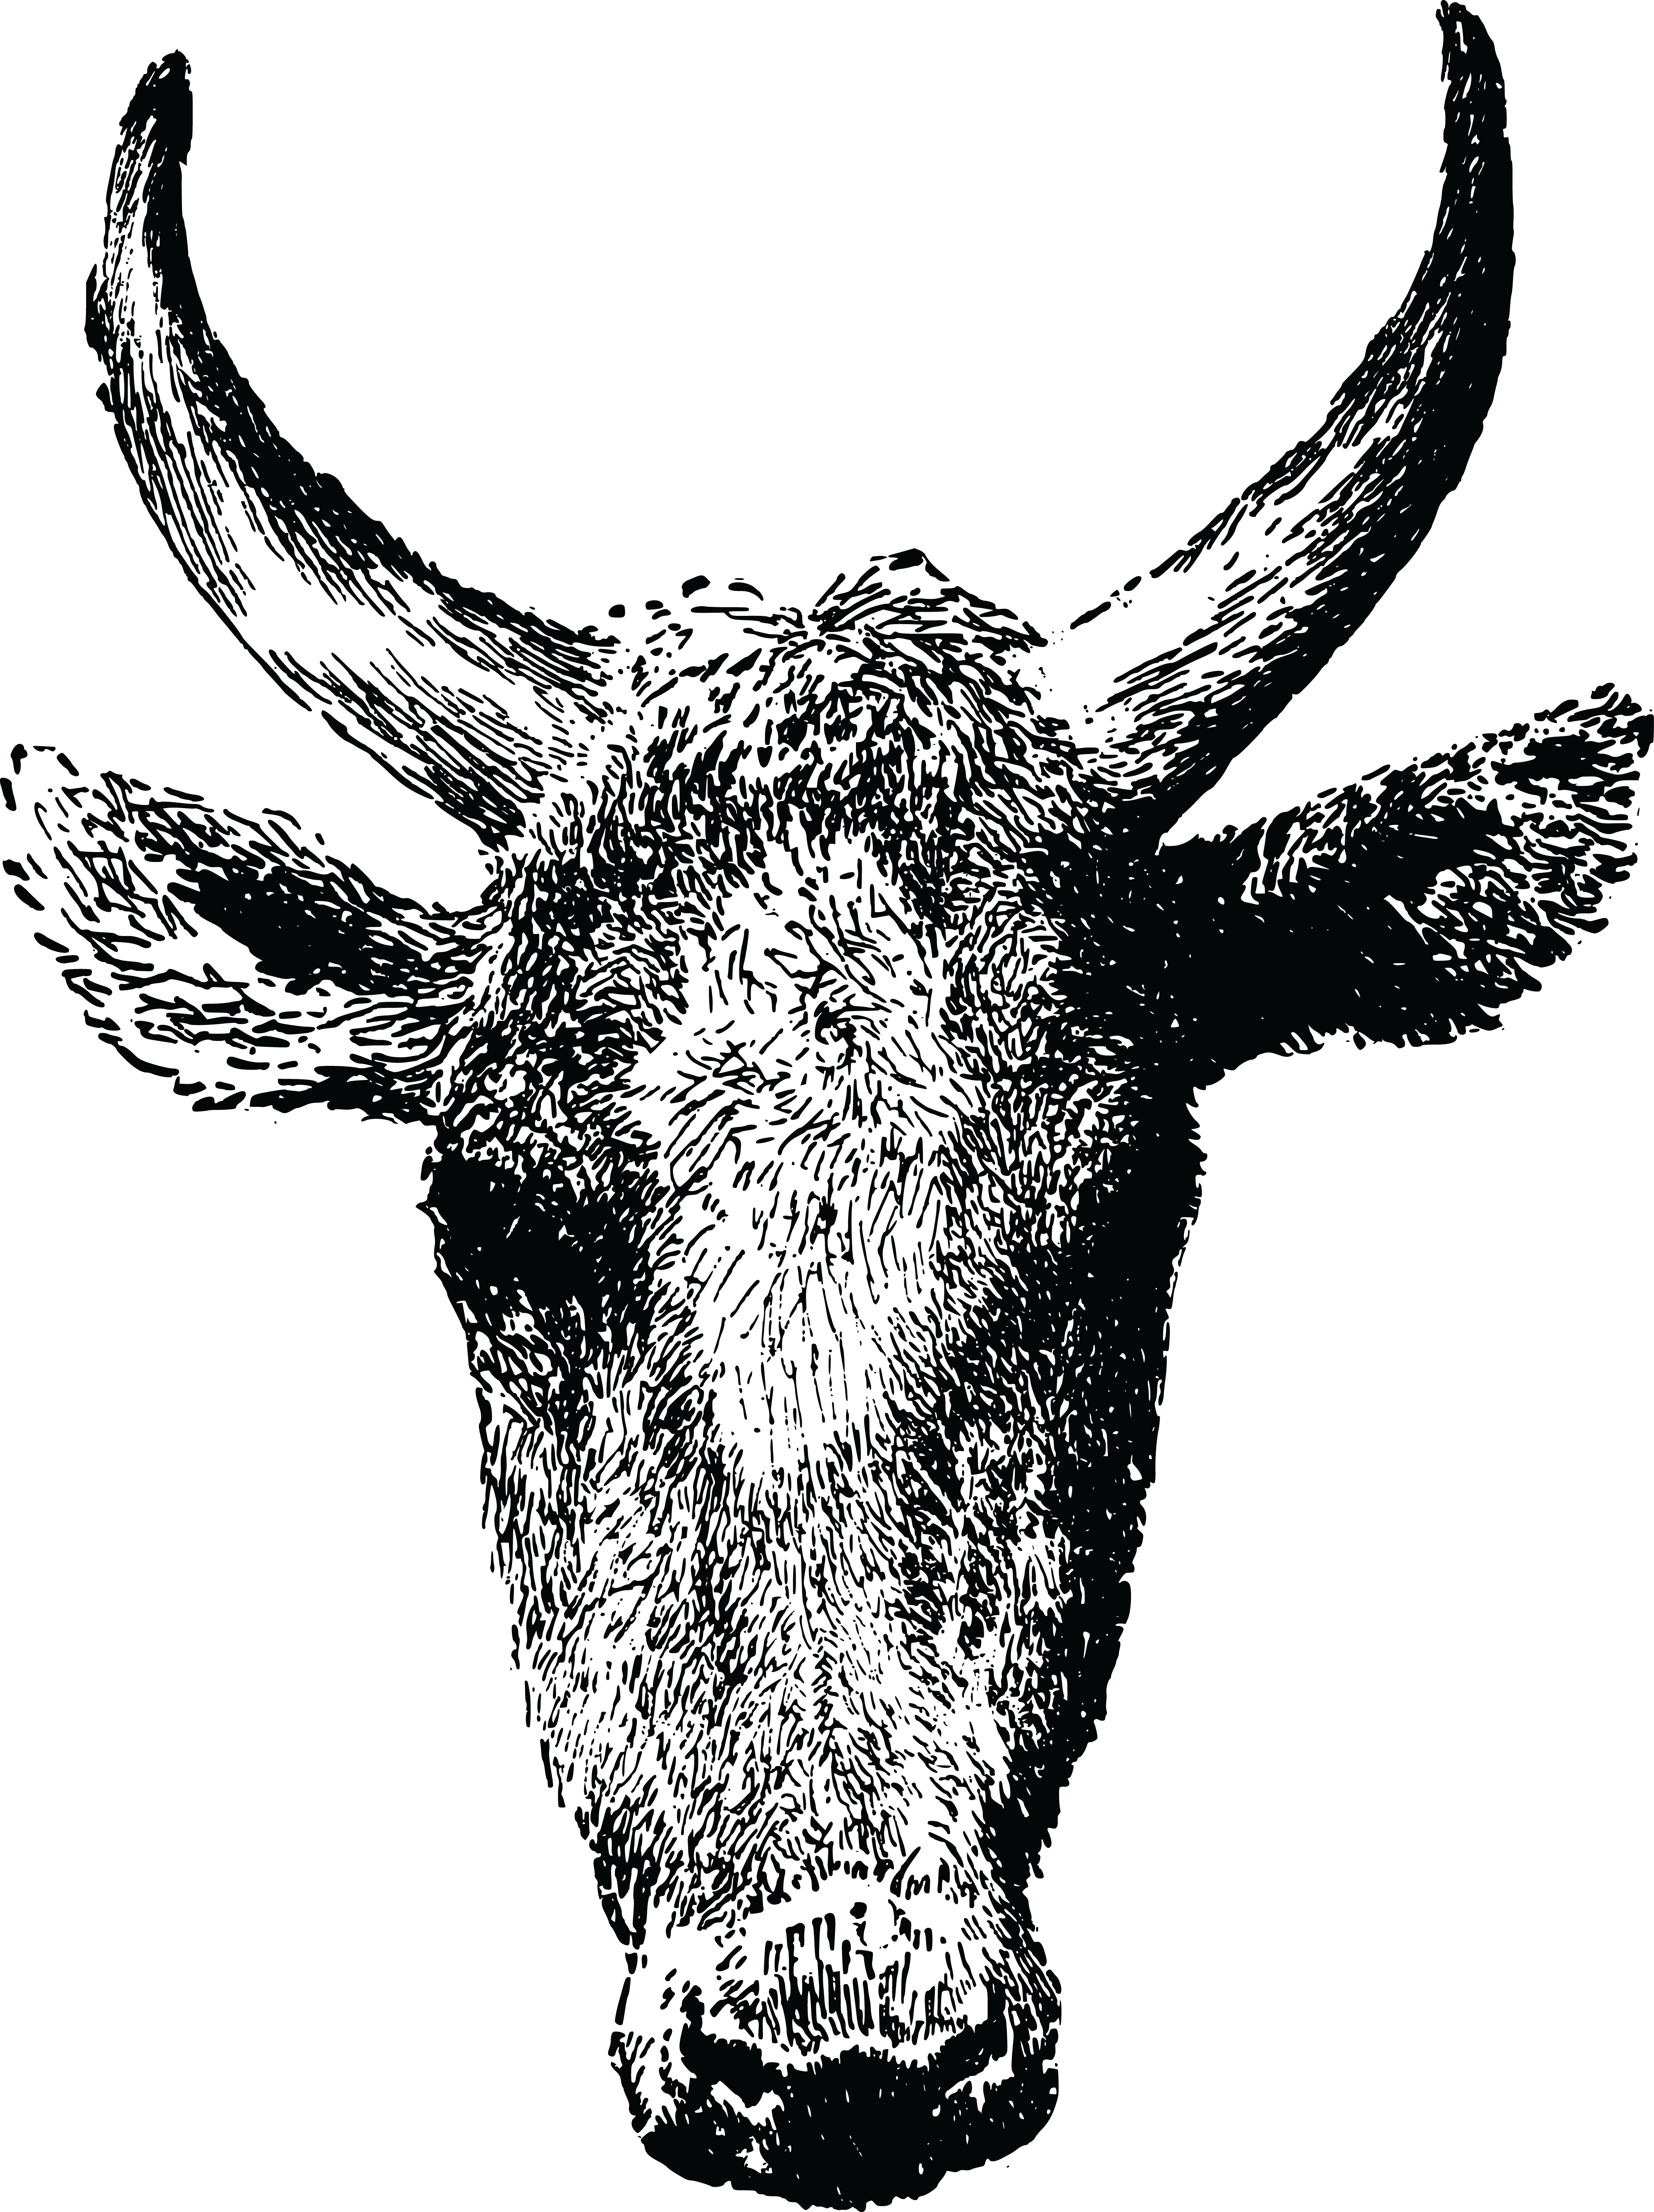 Download Free Clipart Of A cow head